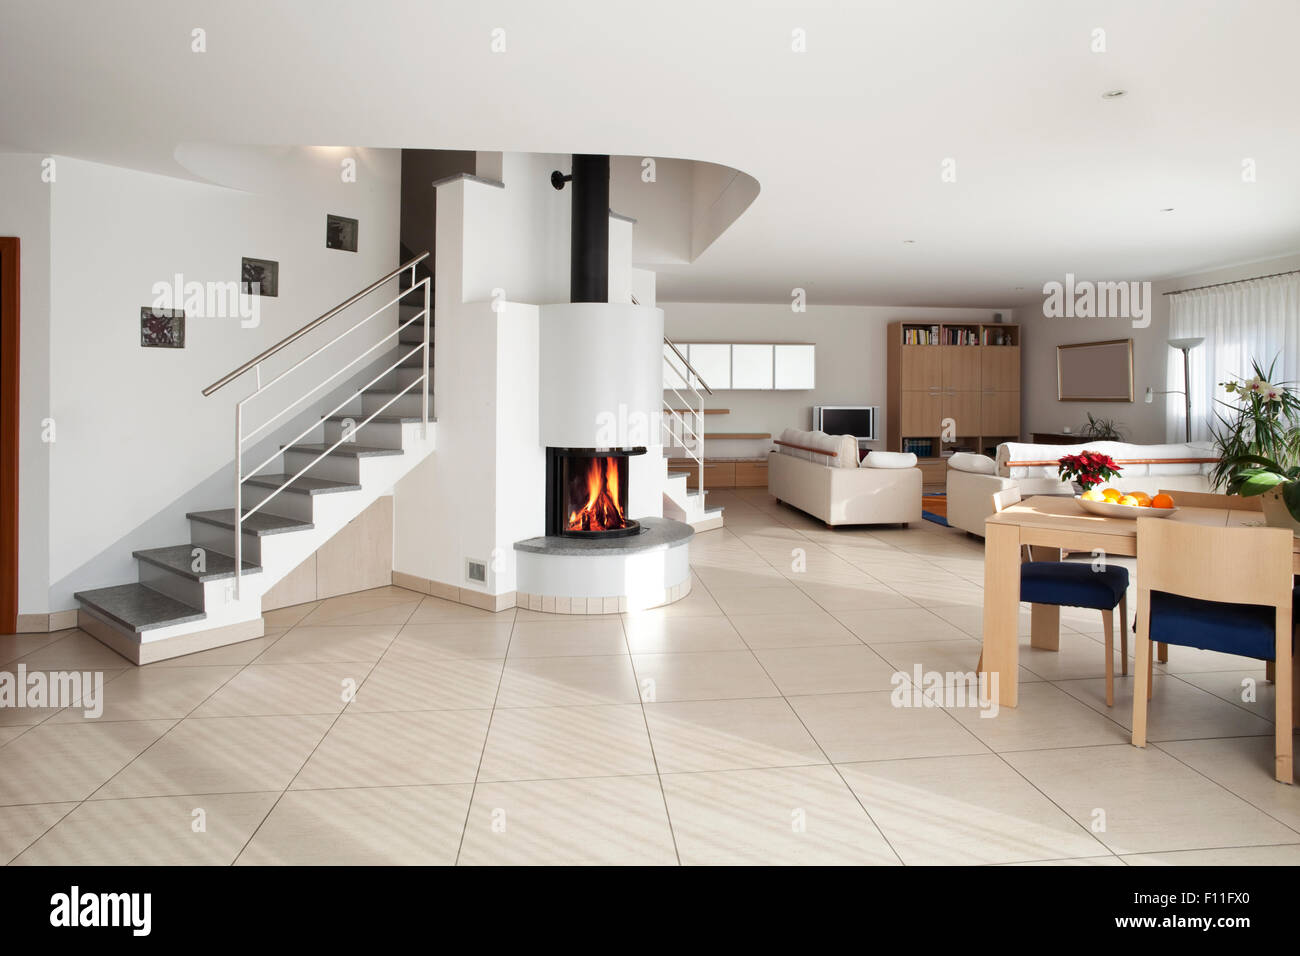 wide interior apartment livingroom with double stairs Stock Photo